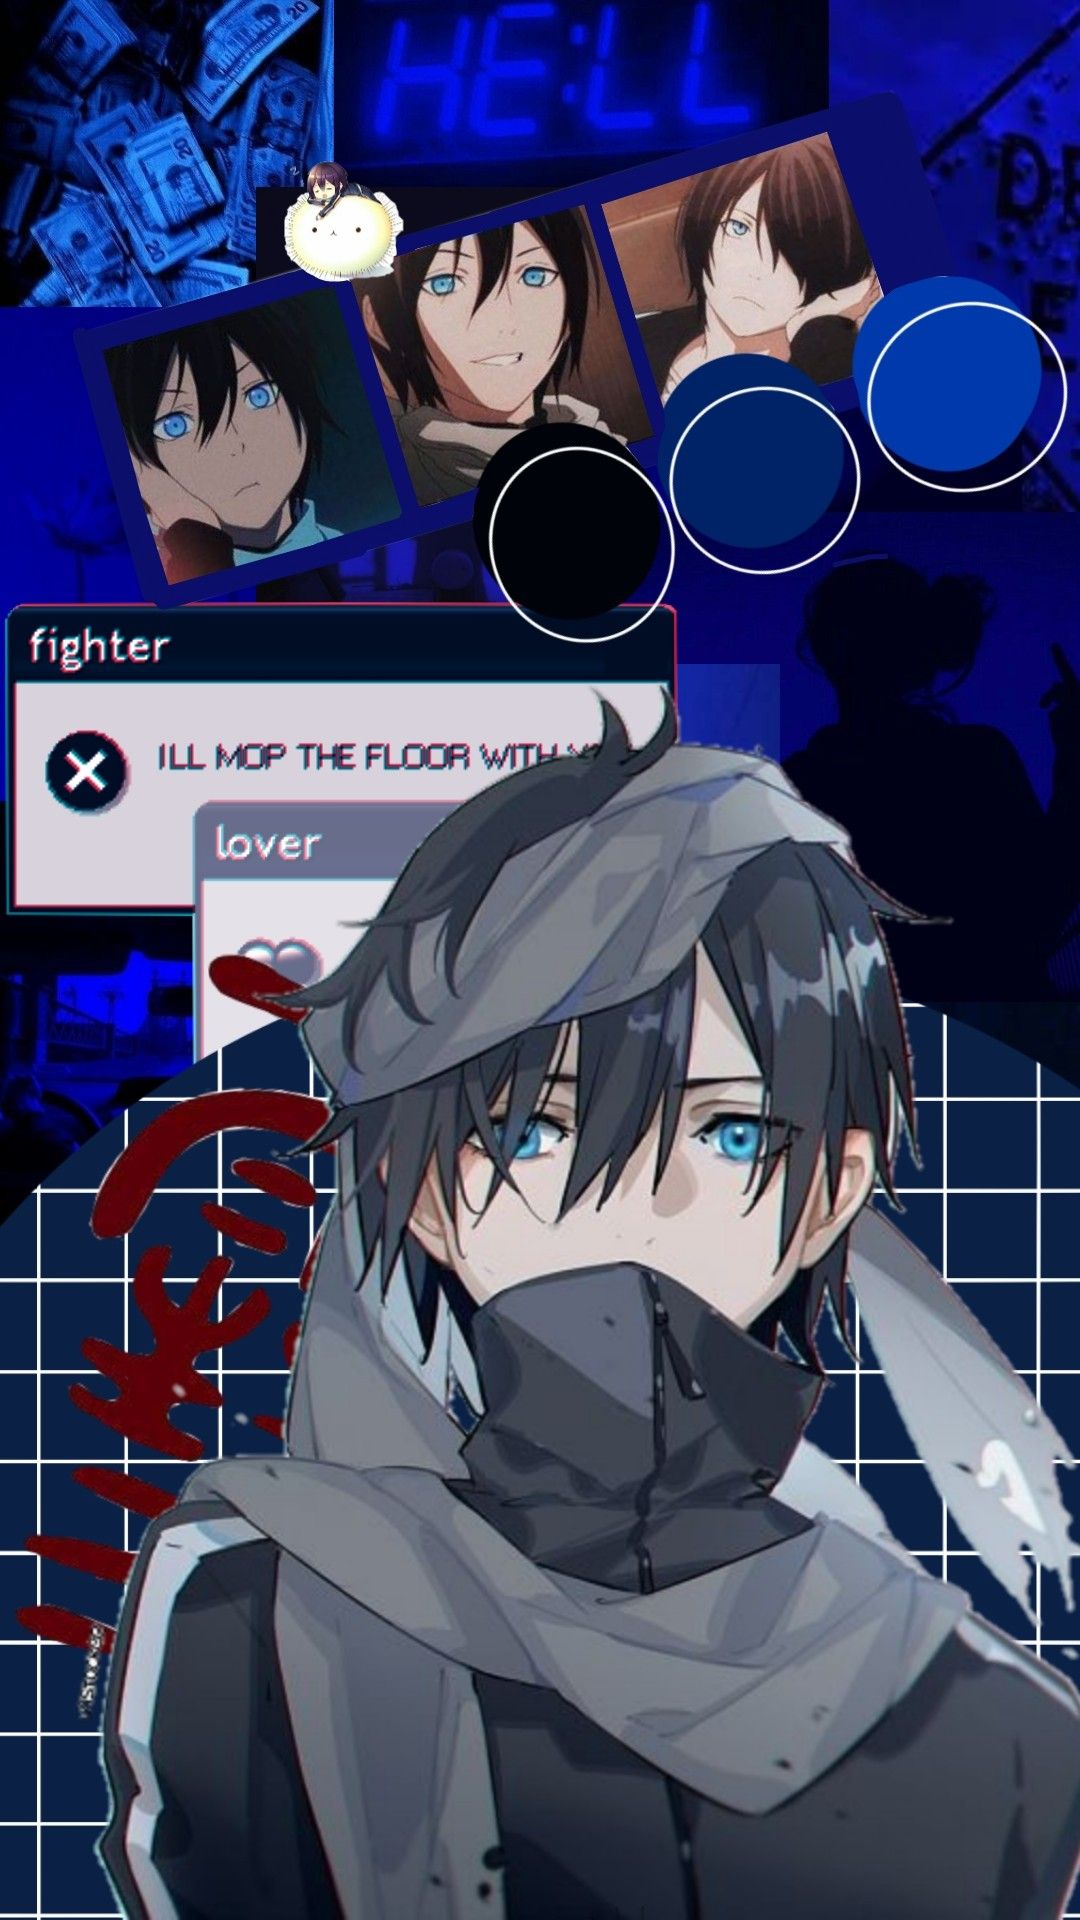 1080x1920 A anime wallpaper of yato from noragami | Anime, Yato, Anime wallpaper